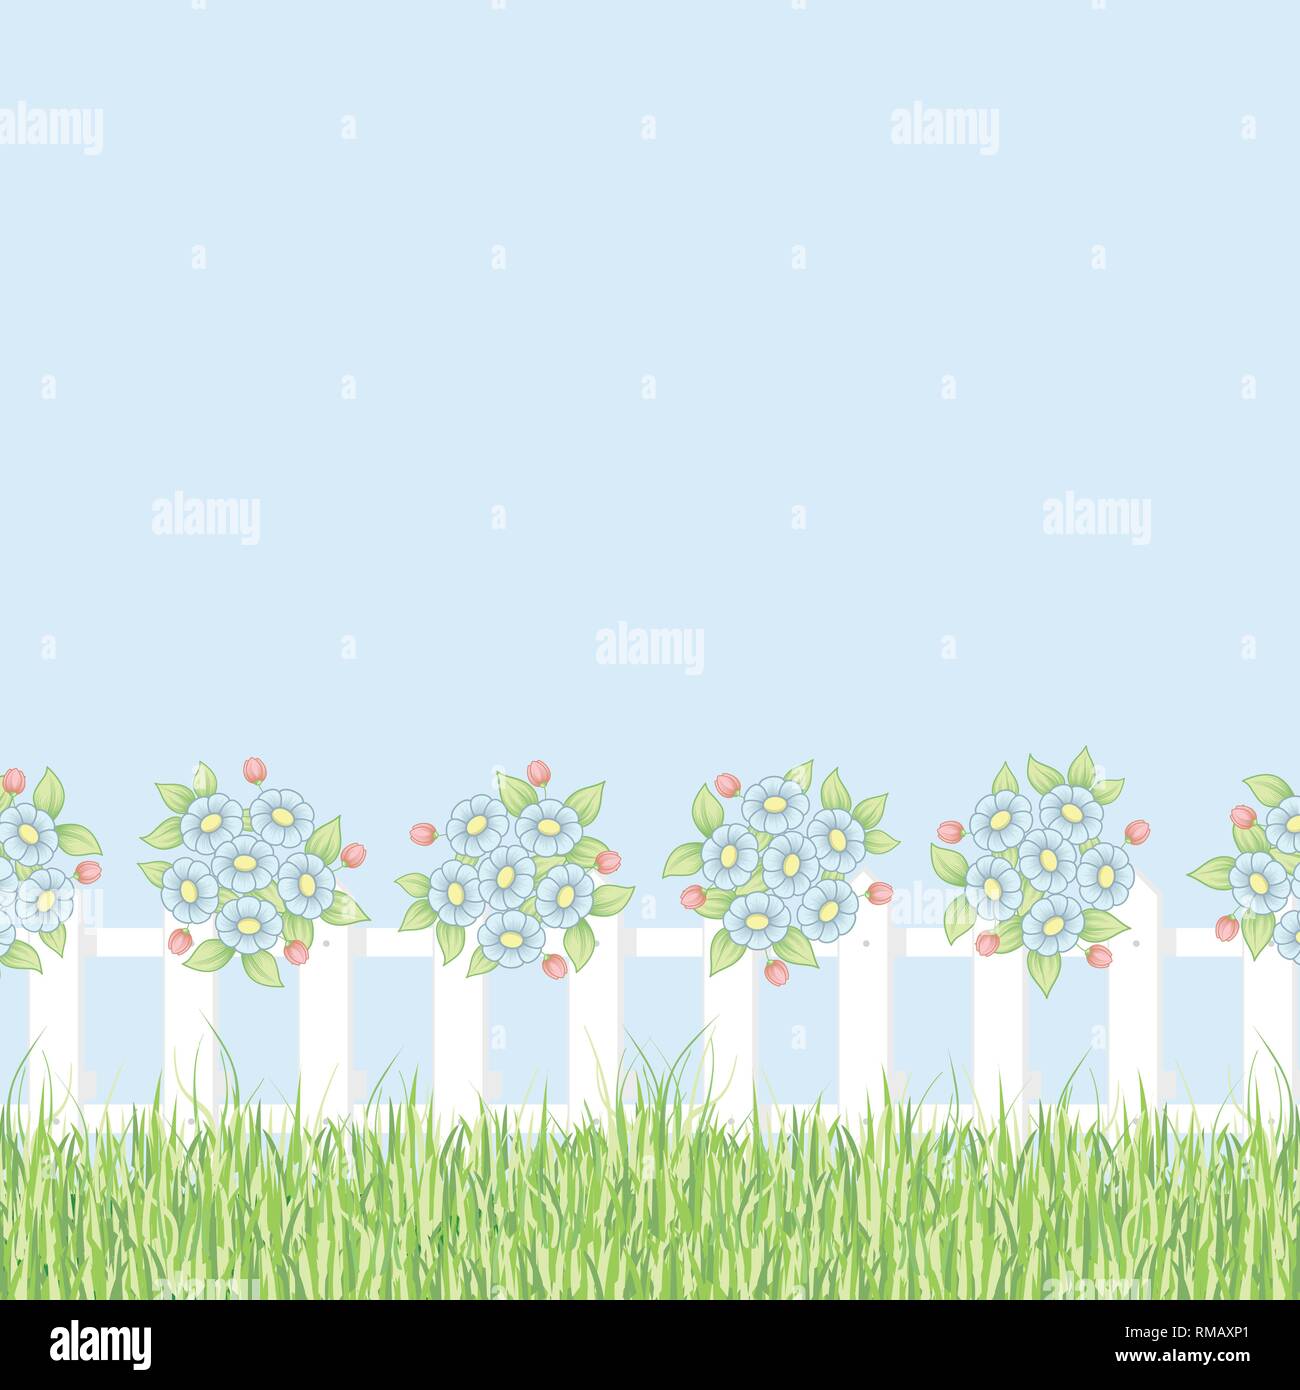 Background with green grass , white fence and daisies flowers Stock Vector